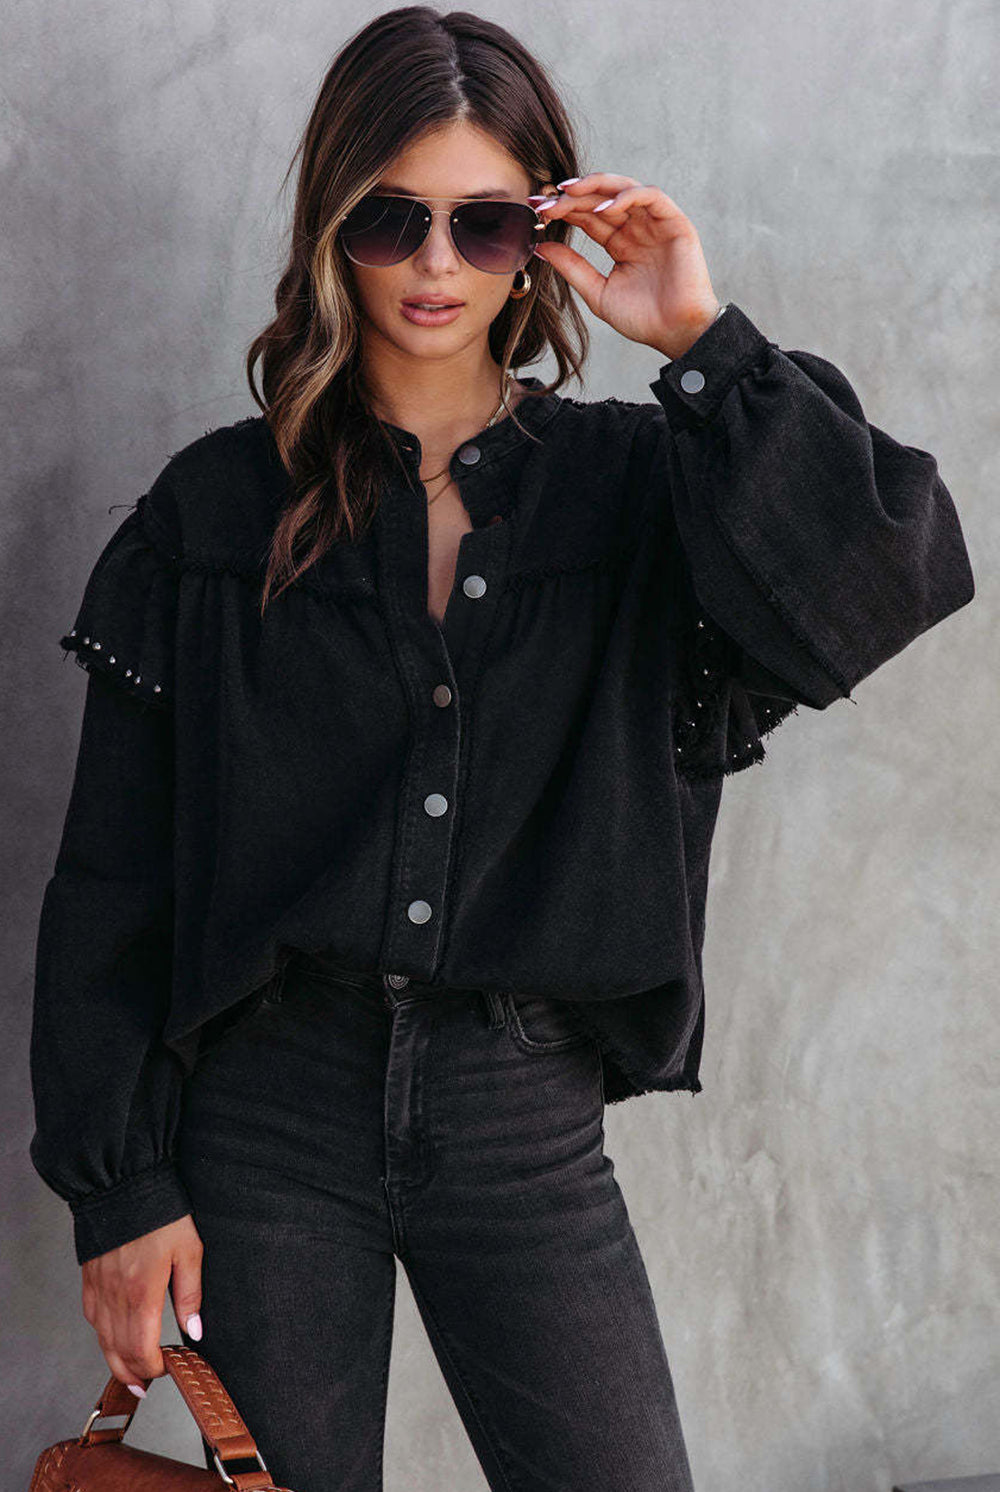 A stylish woman sports a black studded button-up jacket with ruffled edges, pairing it effortlessly with dark denim for a look that's both chic and edgy.